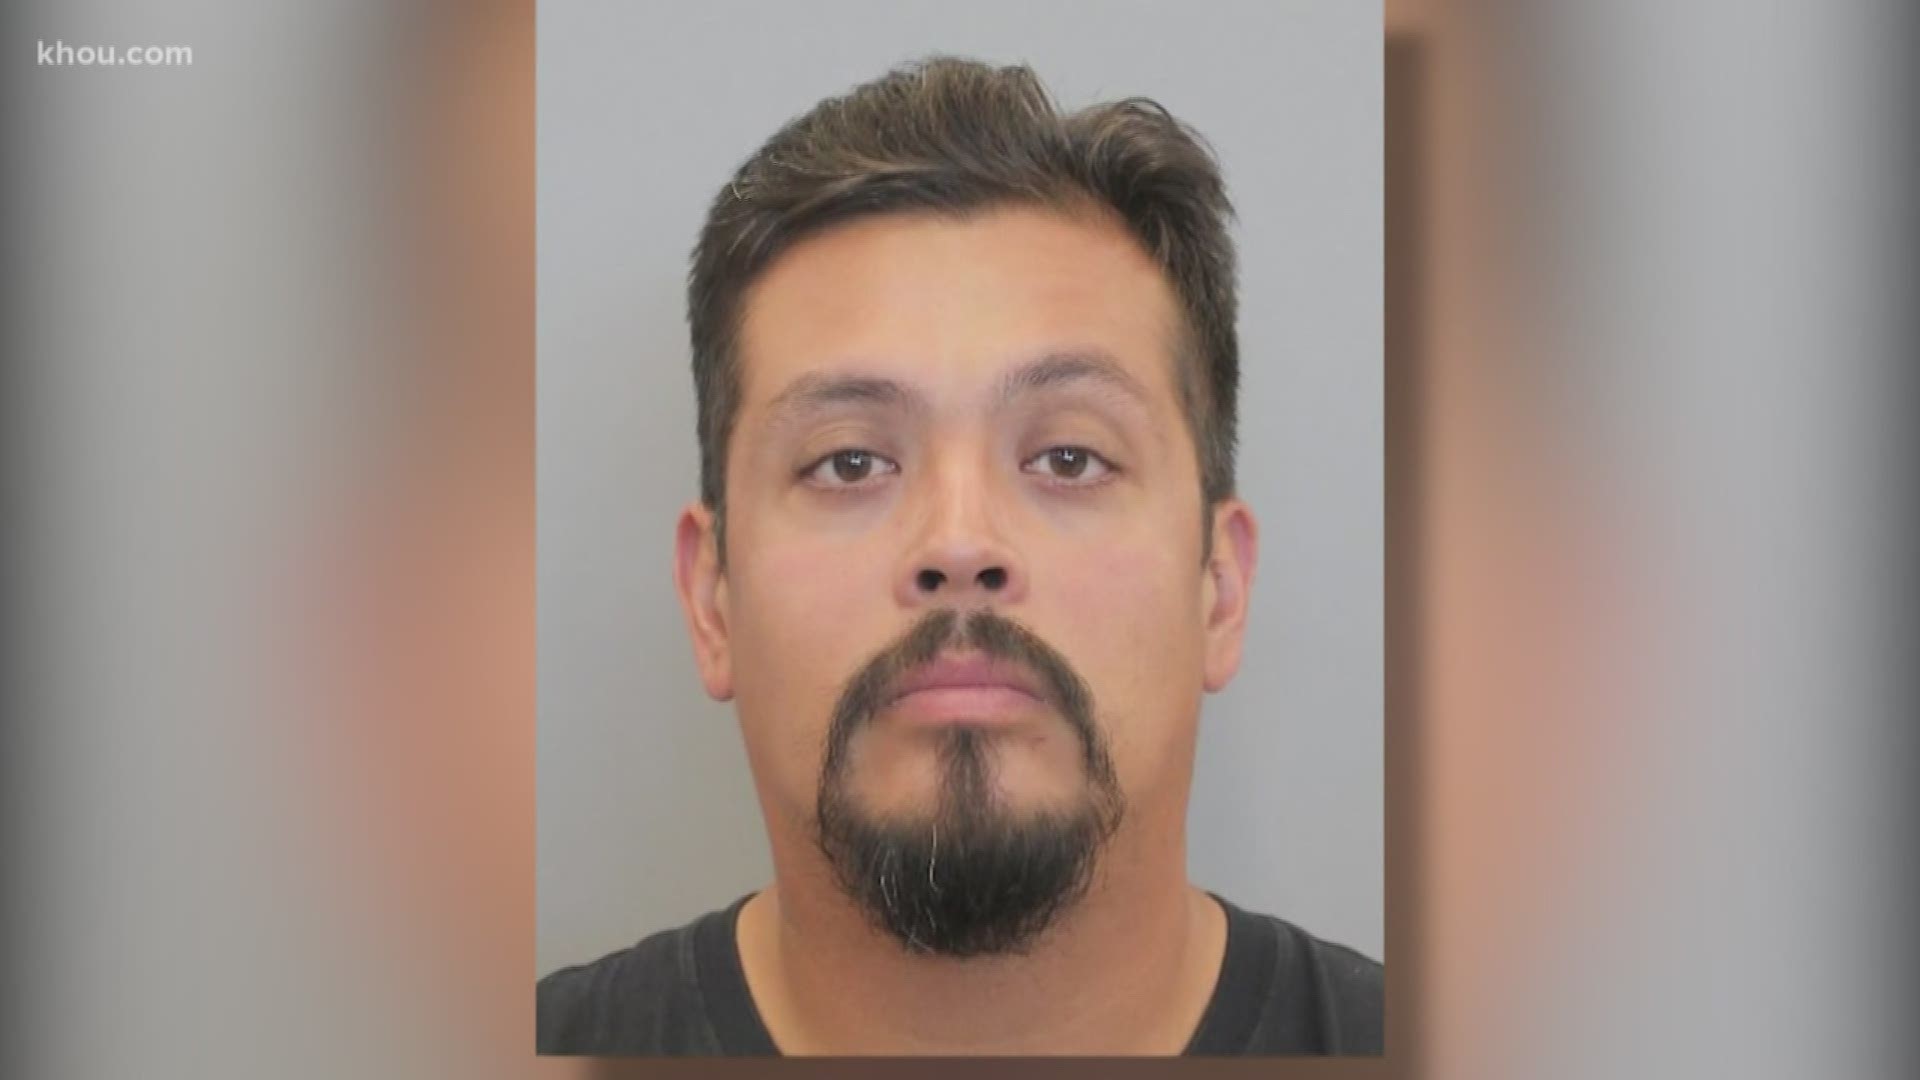 Former deputy constable Richard Cornejo has been charged with two counts of sexual assault after police said he targeted women leaving a night club in Greenspoint.